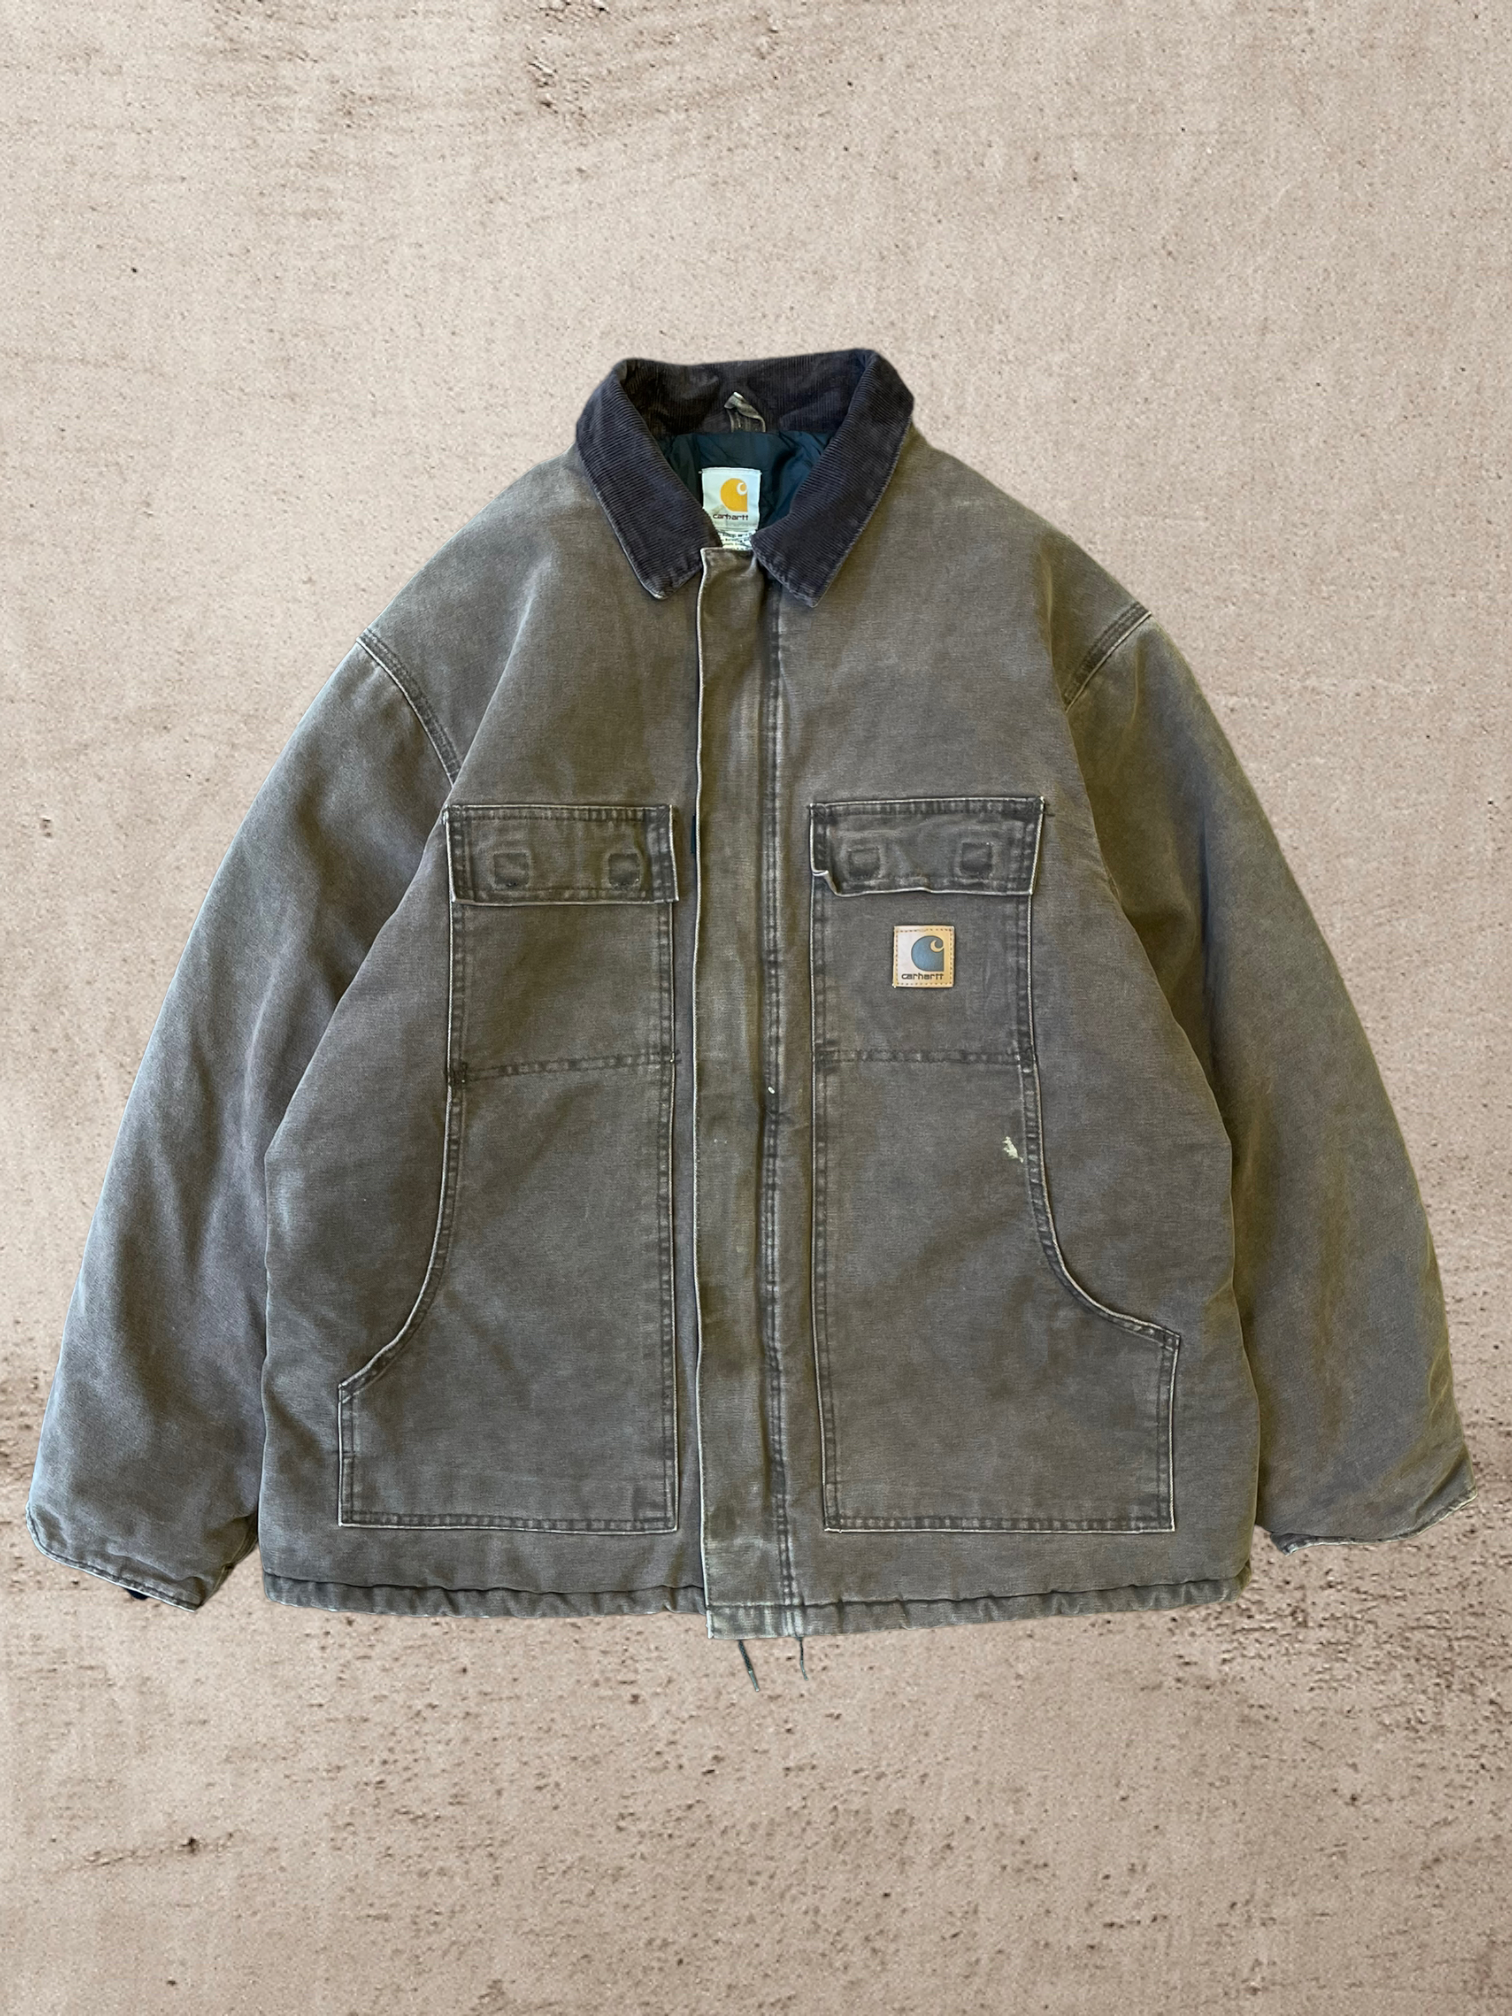 Vintage Carhartt Quilted Lined Jacket - X-Large